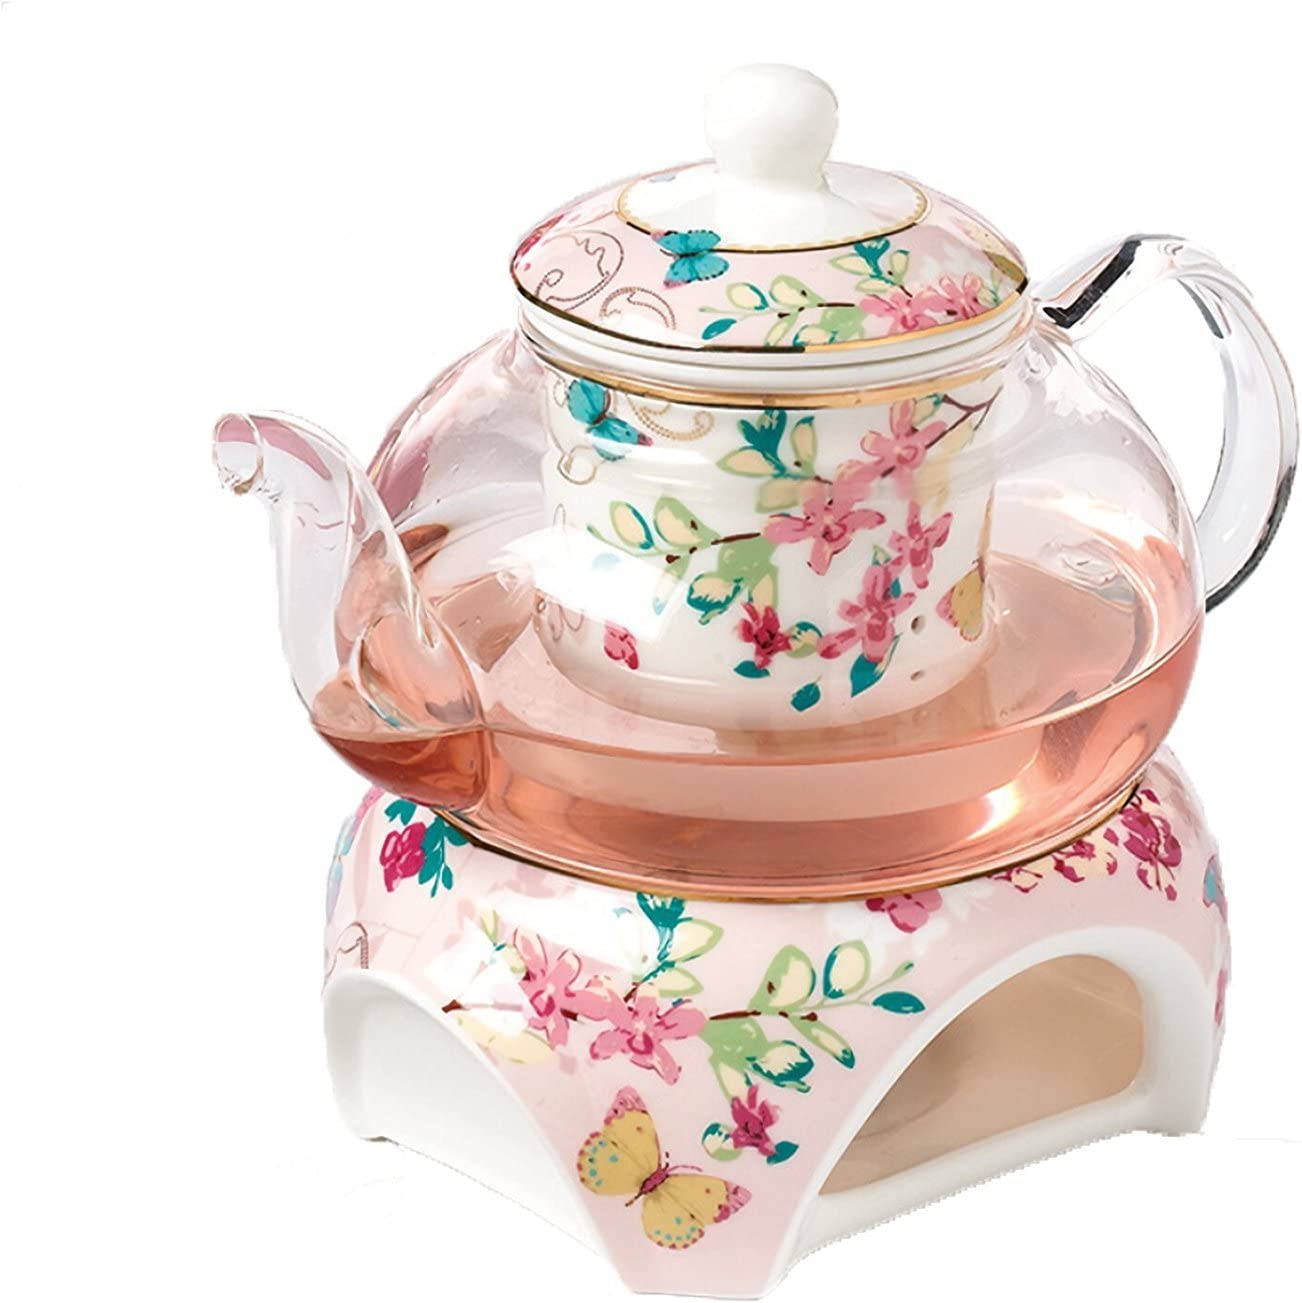 YBK Tech Fine China Glass Teapot with Warmer and Infuser (Pink Butterfly Pattern)